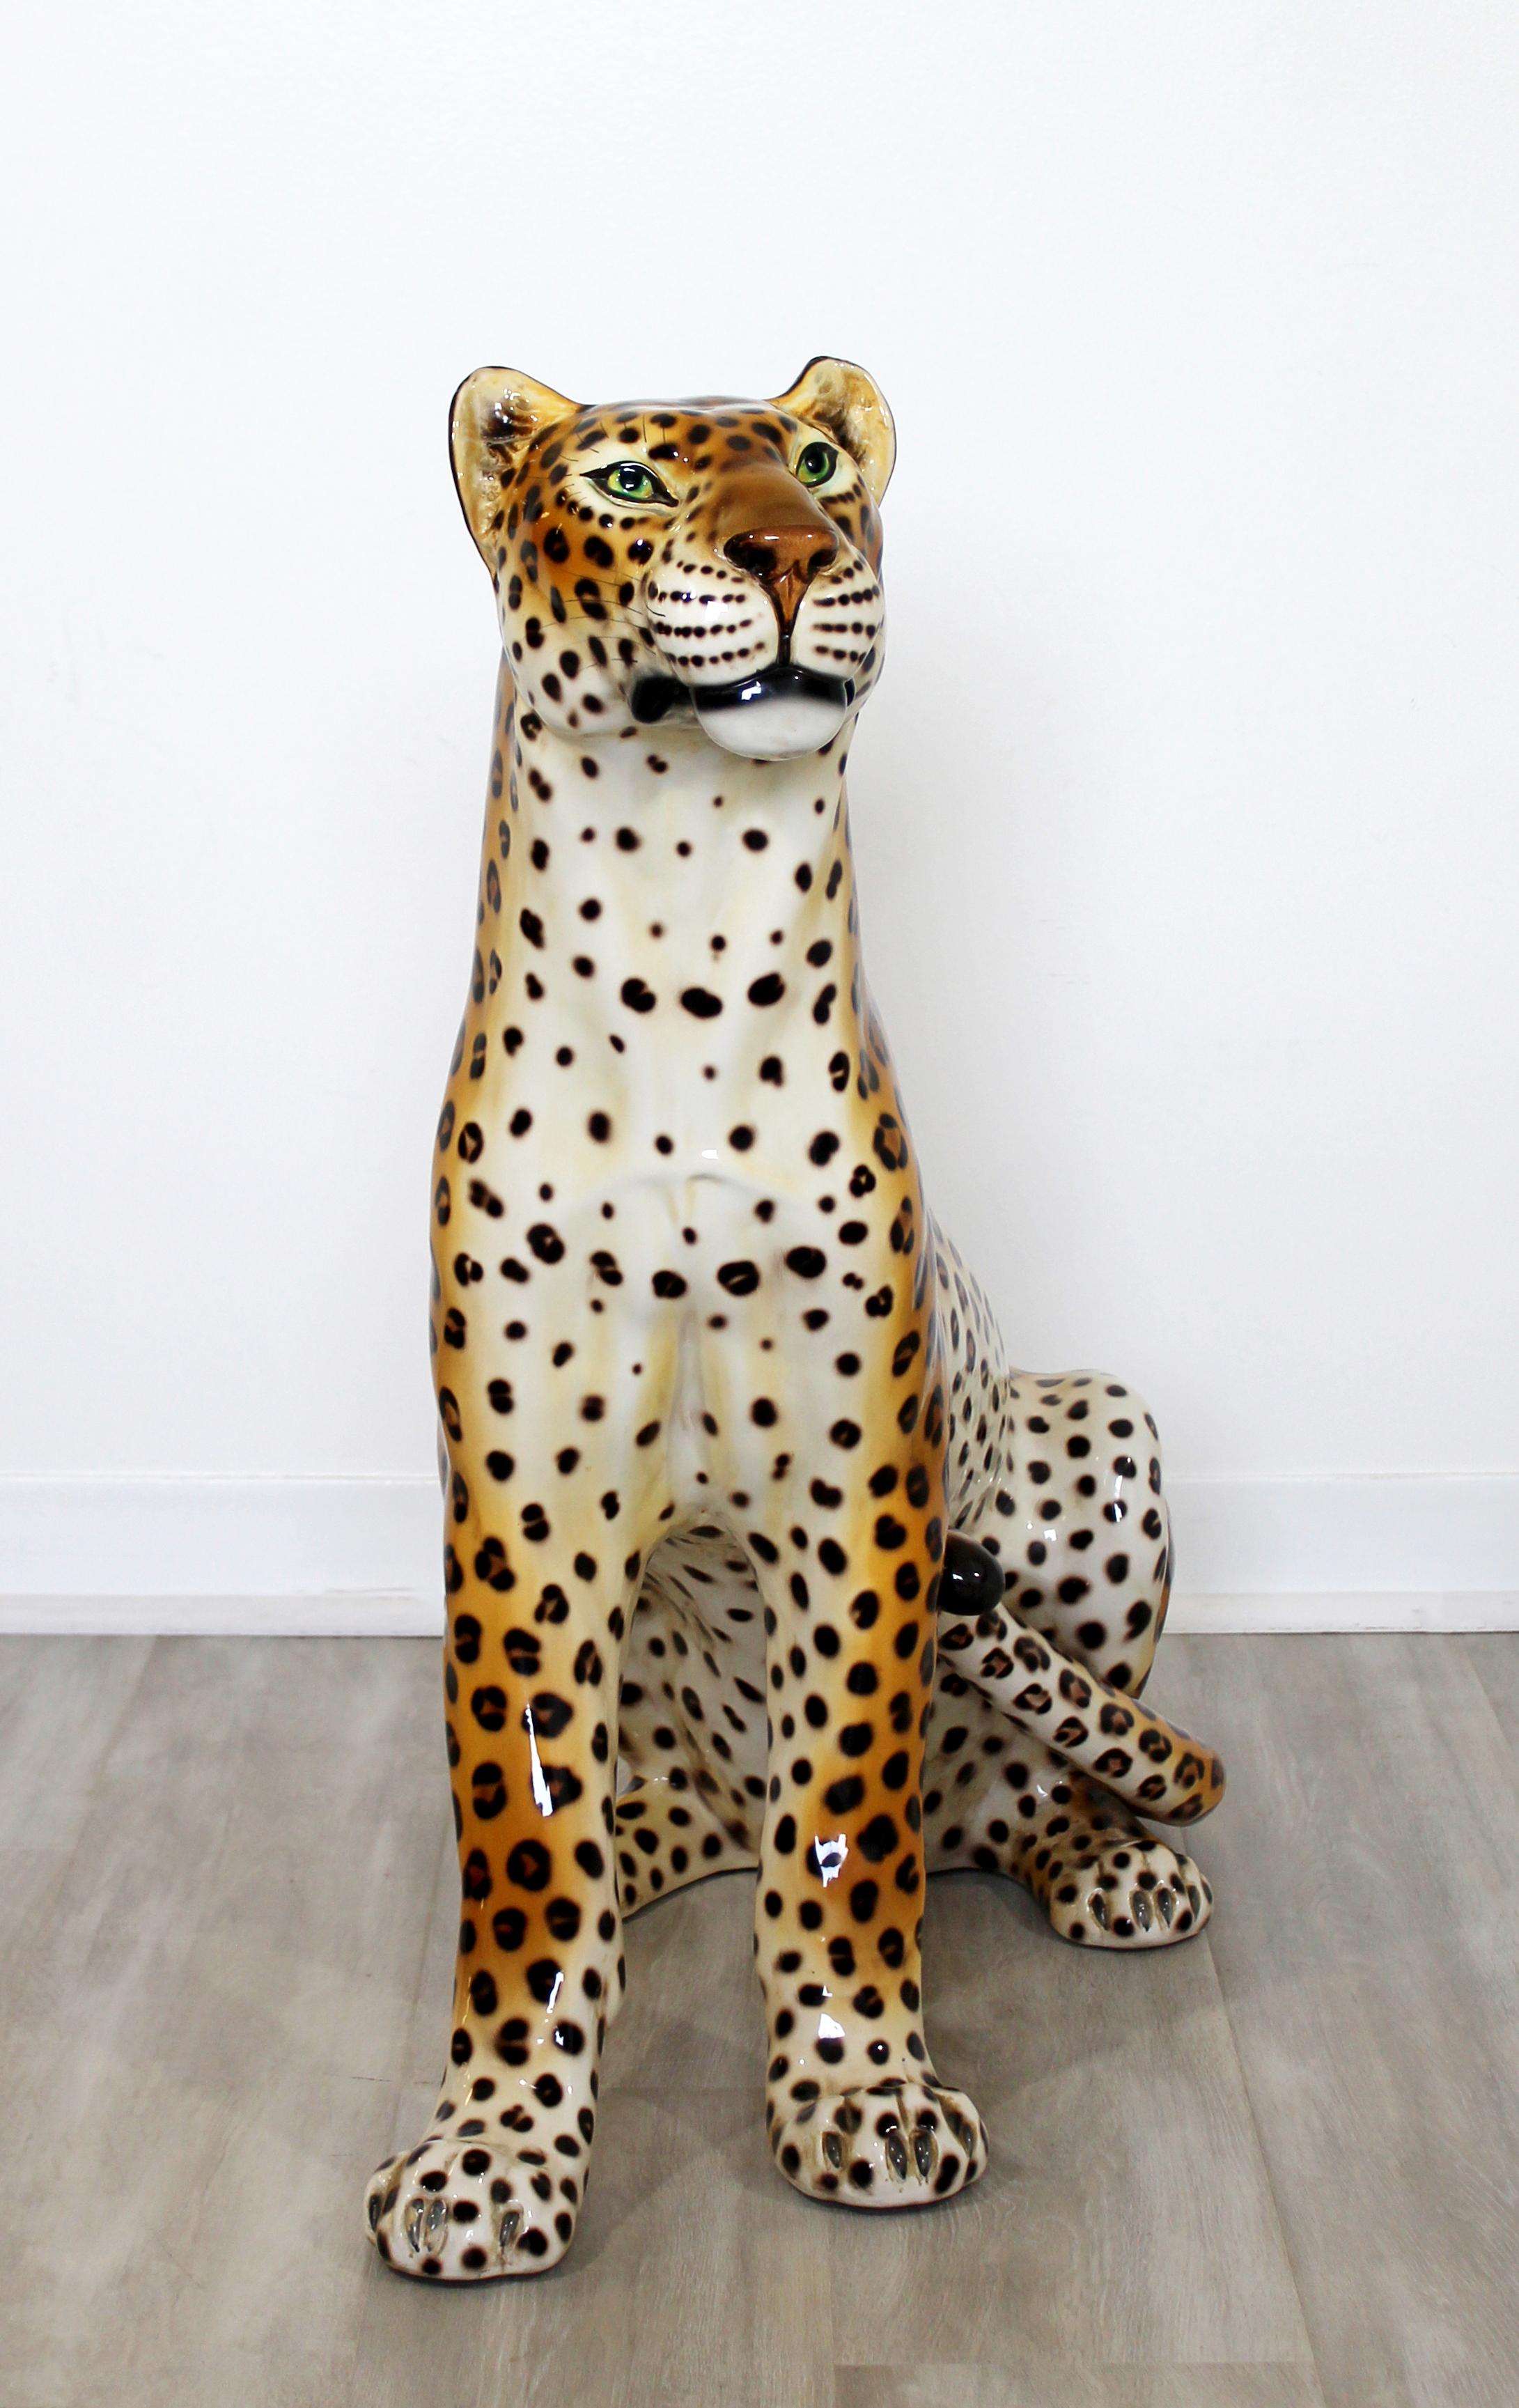 For your consideration is a gorgeous, life-sized, painted porcelain floor sculpture of a cheetah or leopard, circa the 1970s. In excellent vintage condition. The dimensions are 18